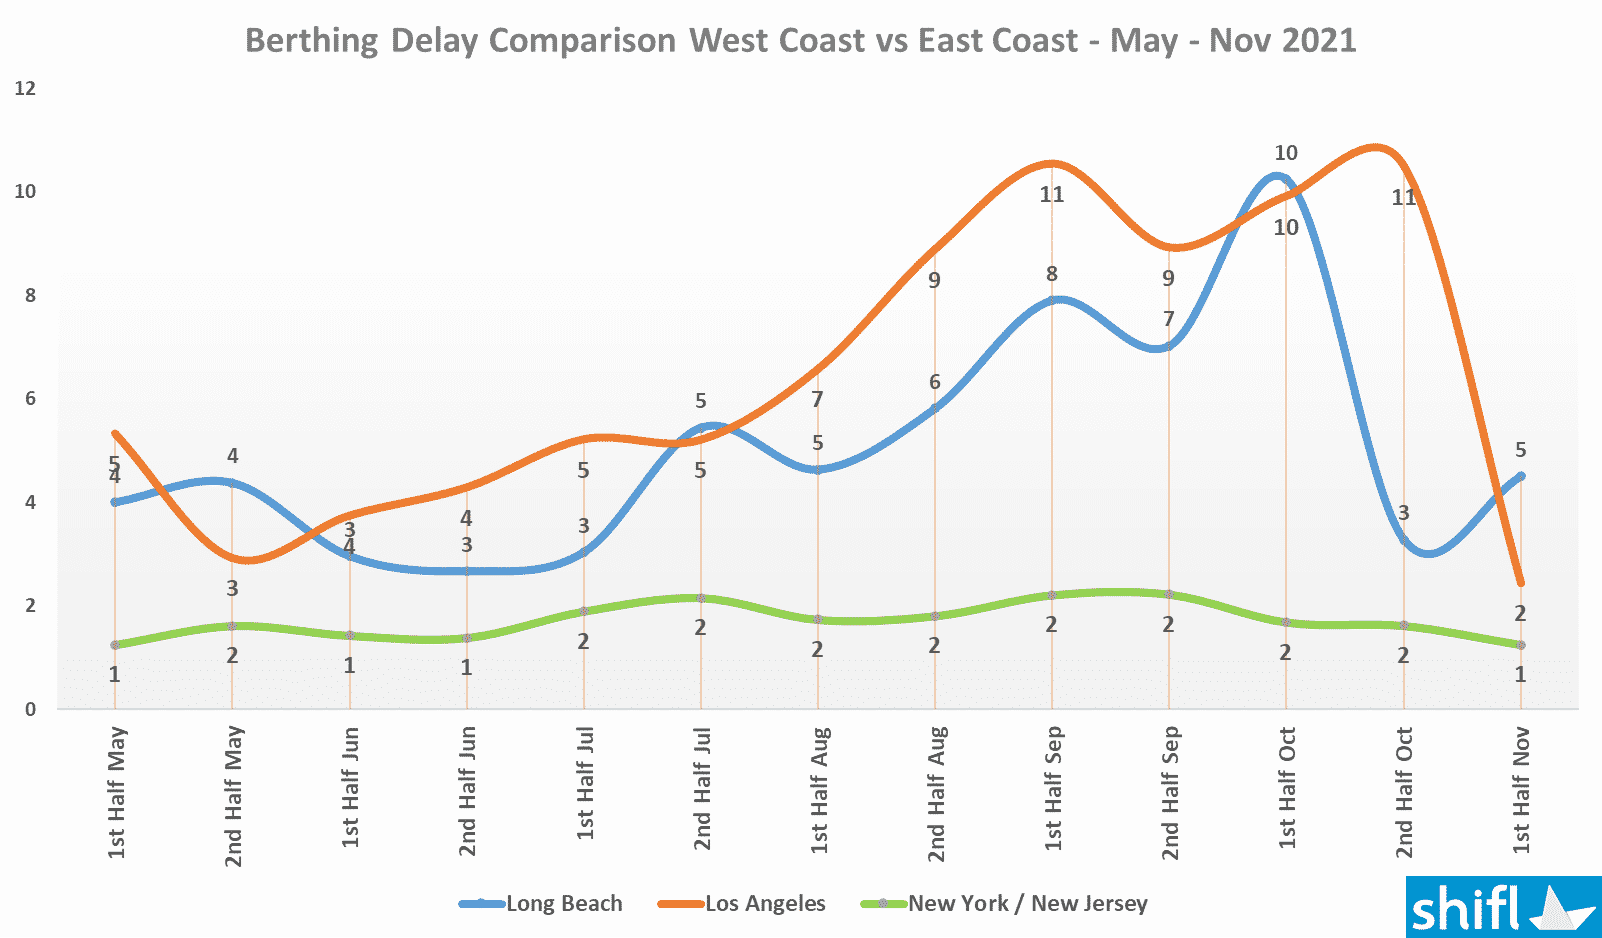 Chart showing berthing delay comparison